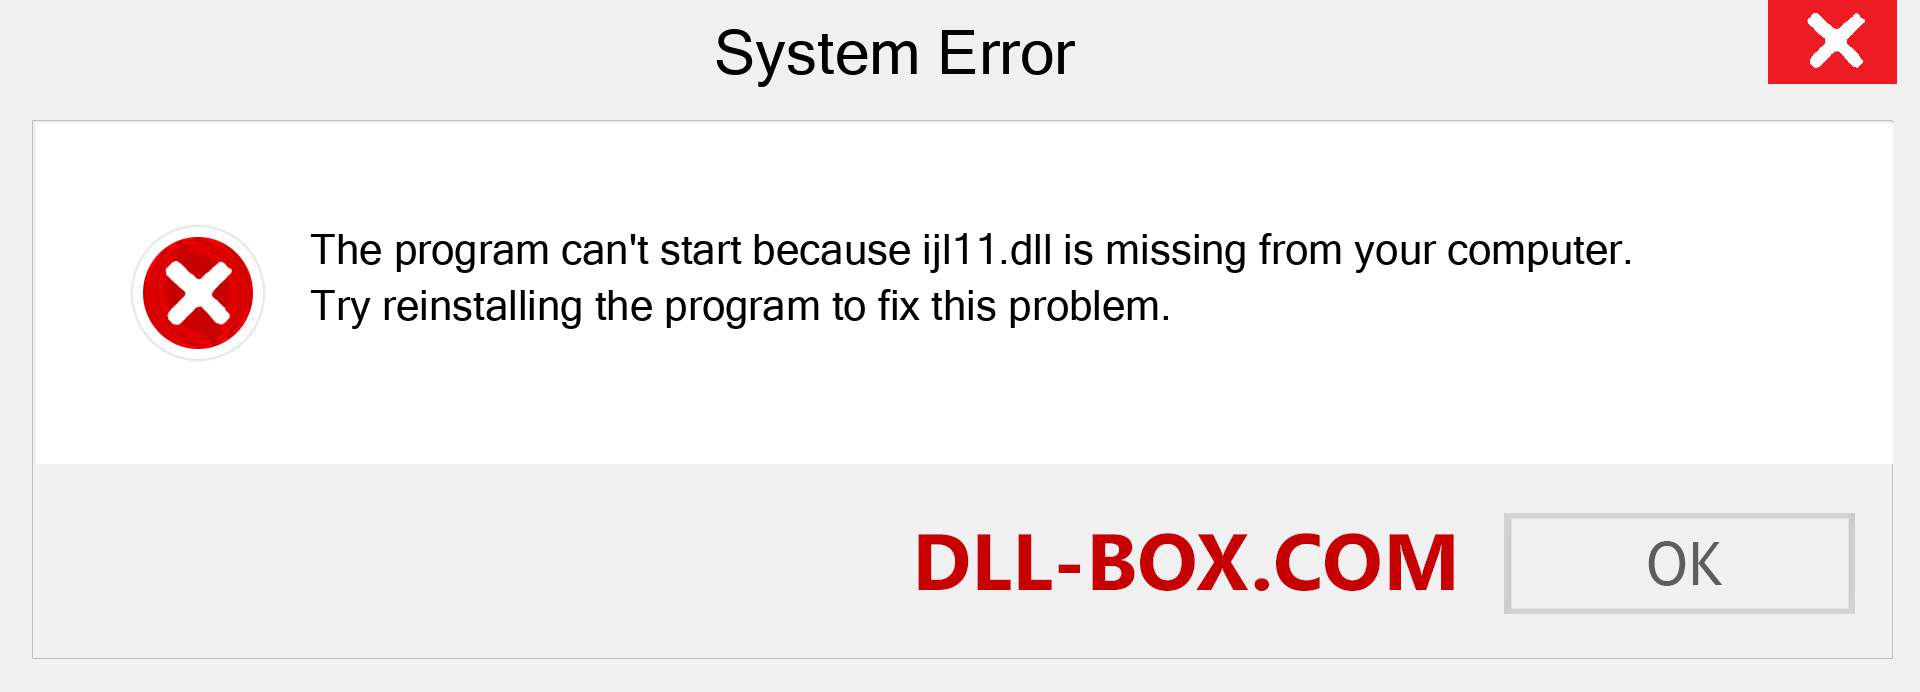  ijl11.dll file is missing?. Download for Windows 7, 8, 10 - Fix  ijl11 dll Missing Error on Windows, photos, images